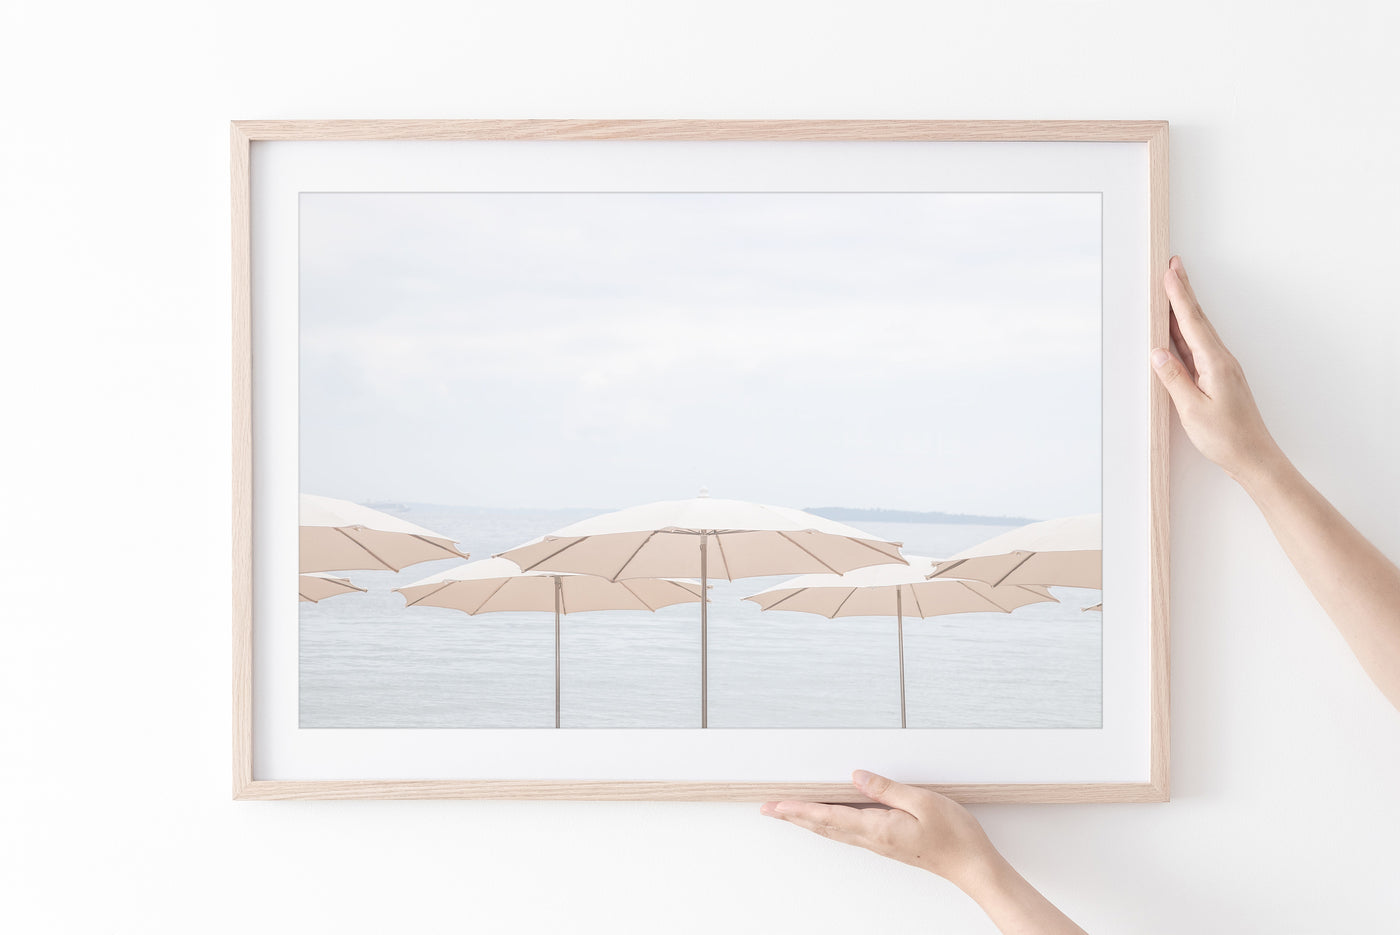 French Riviera No 8 - Relaxing happy wall art by Cattie Coyle Photography